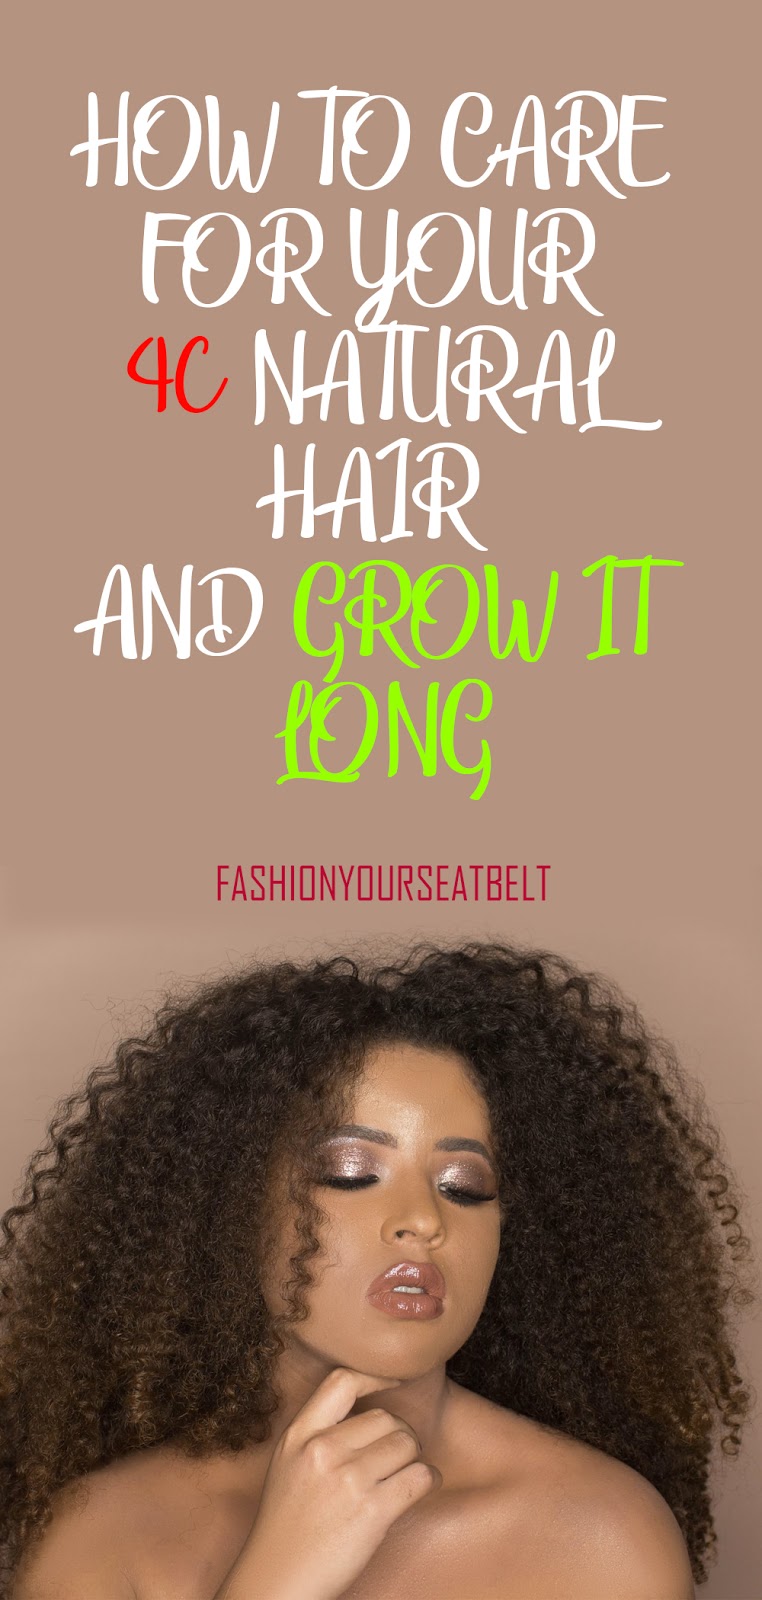 How To Care For Your 4c Natural Hair And Grow It Long